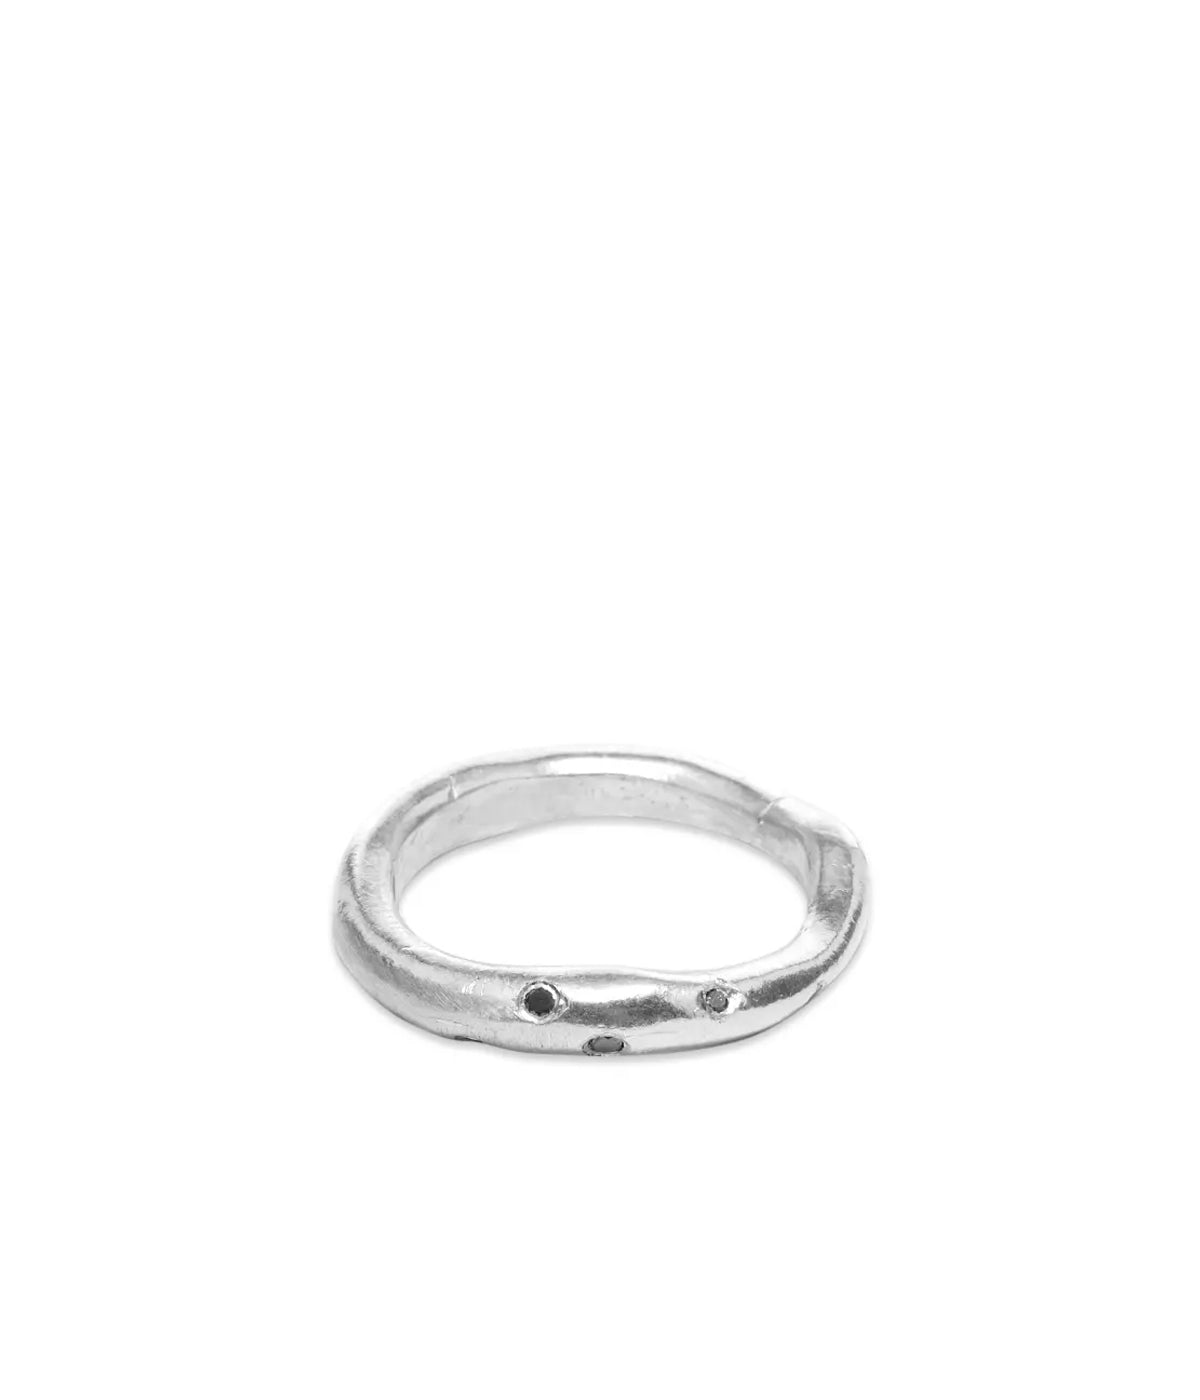 Hand Shaped Matte Ring with Black Diamond in Silver